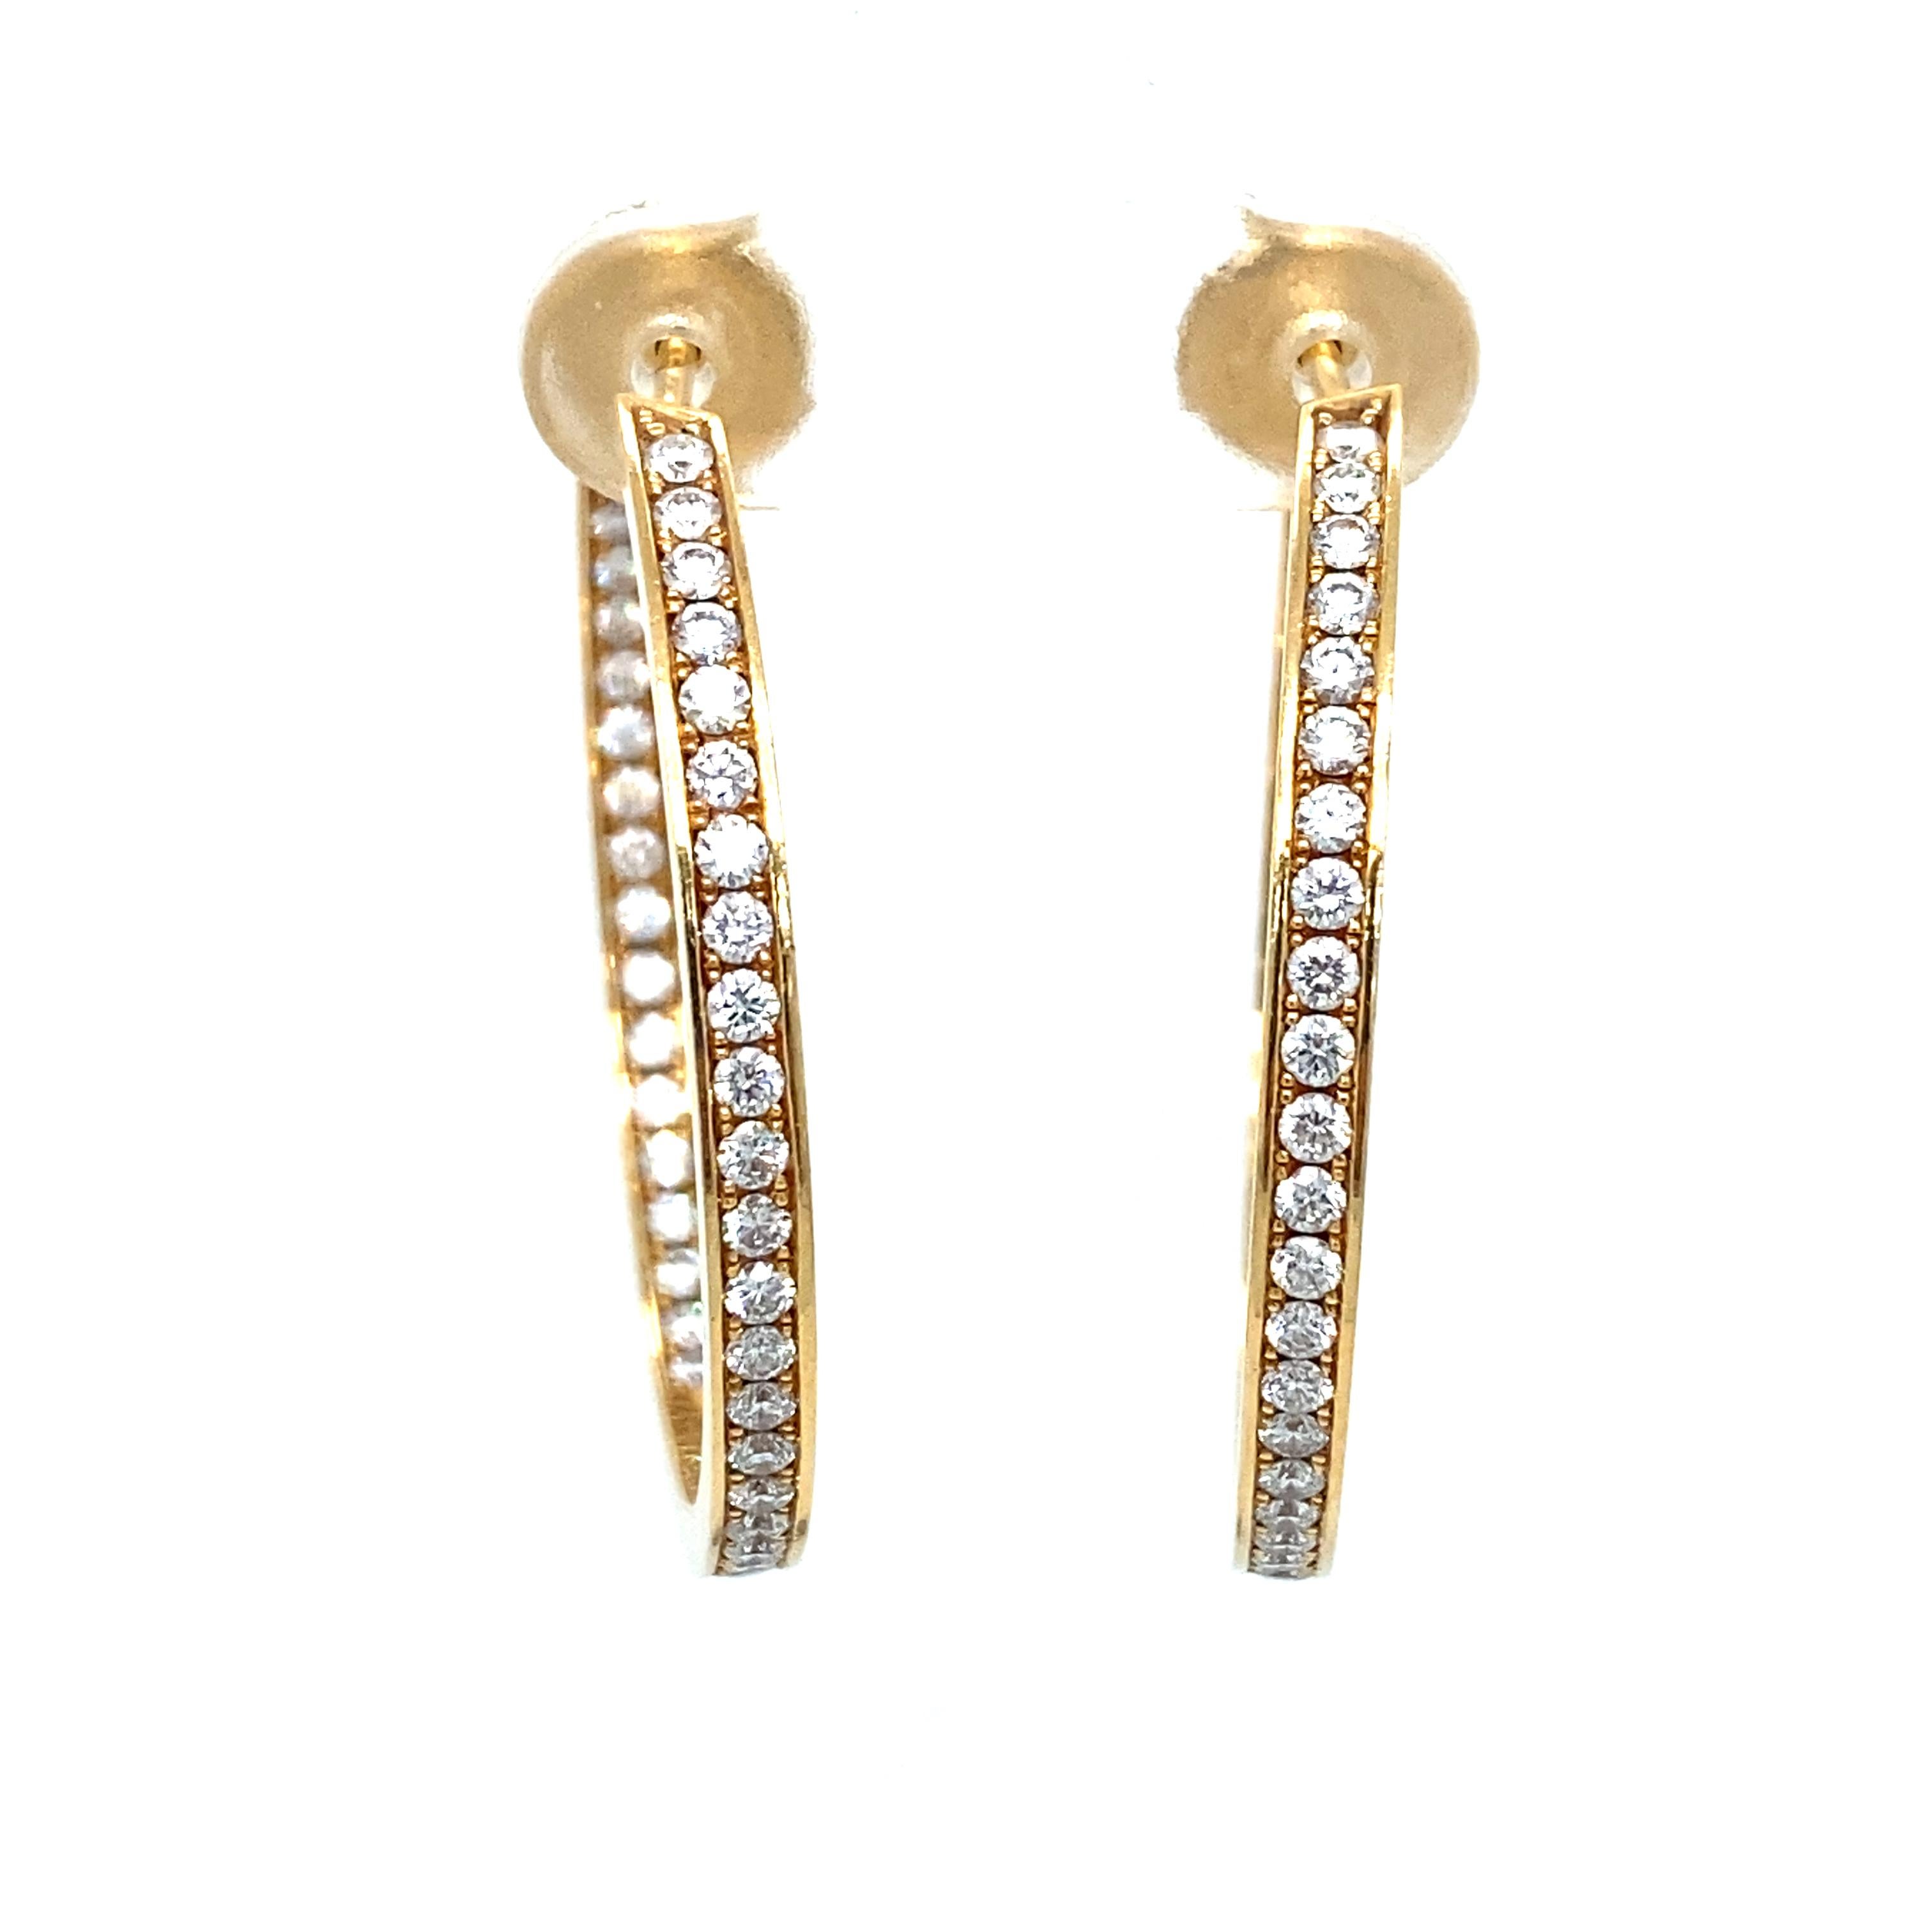 Item Details: These spectacular diamond earrings by CARTIER feature two carats of round diamonds in an inside-out setting crafted of 18 karat yellow gold. They are fitted with secure backs and are also marked with the CARTIER maker's stamp. These